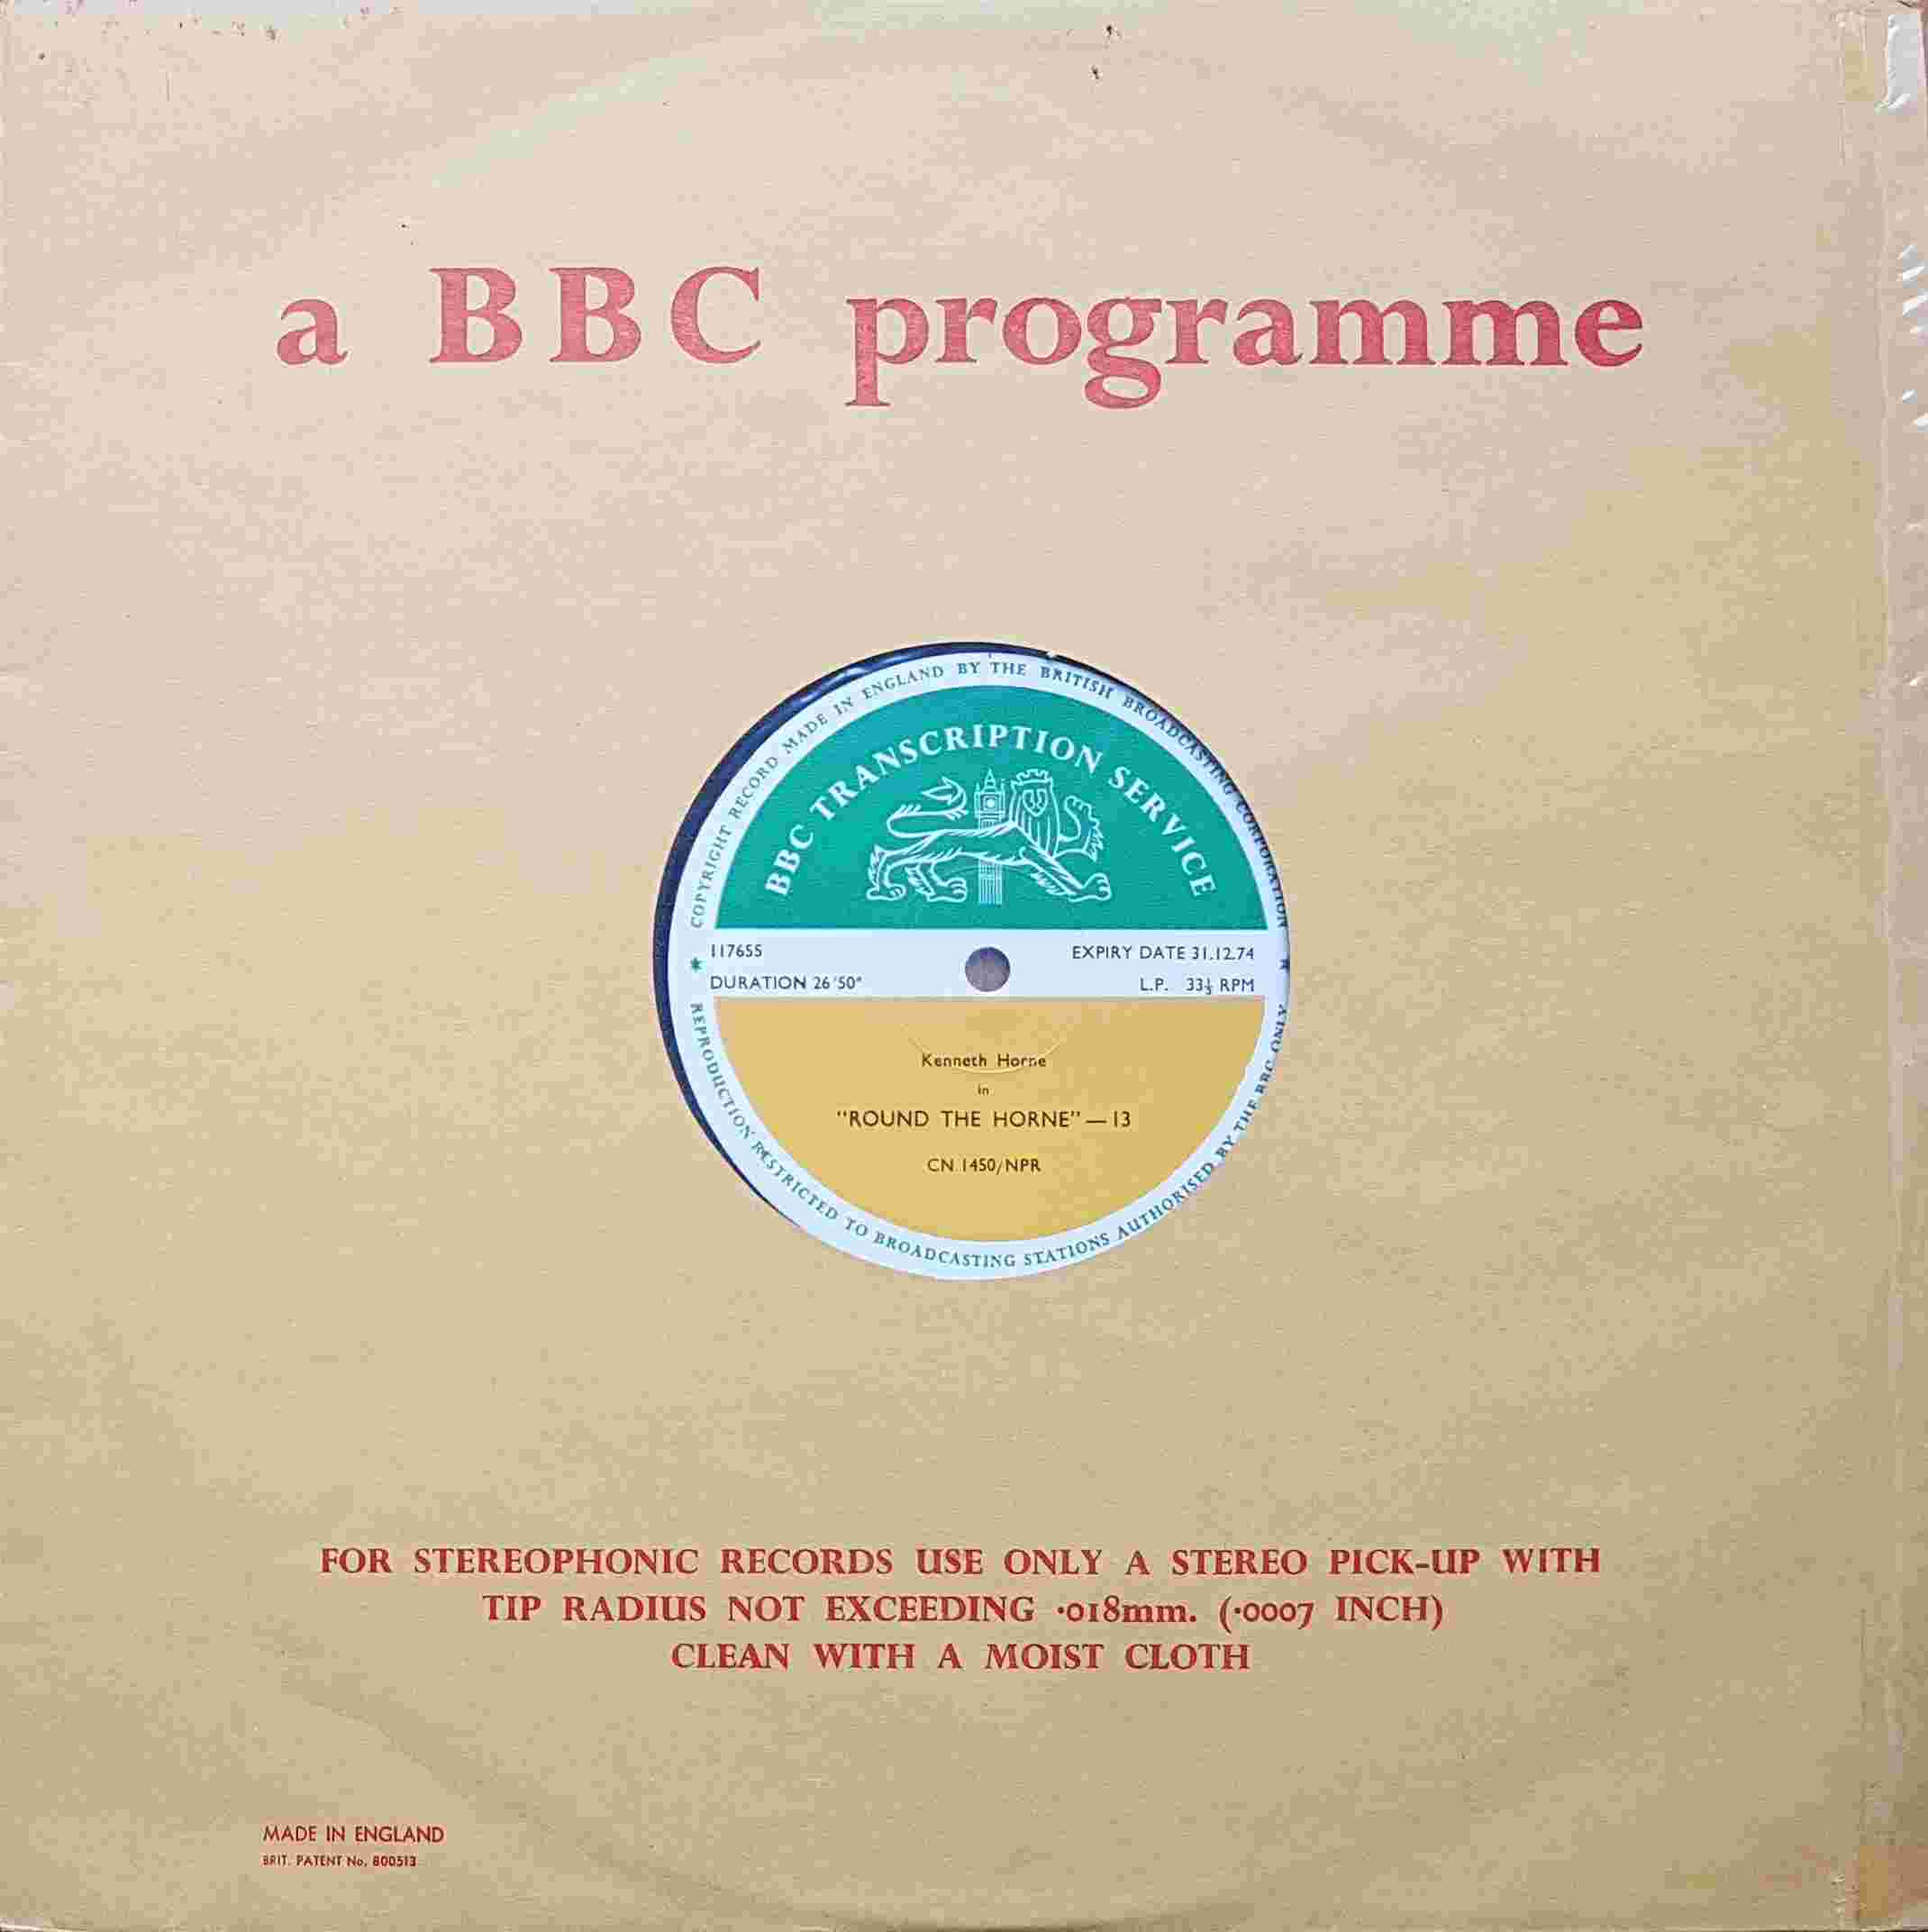 Picture of CN 1450 NPR 7 Round the Horne - 13 & 14 by artist Kenneth Horne from the BBC records and Tapes library